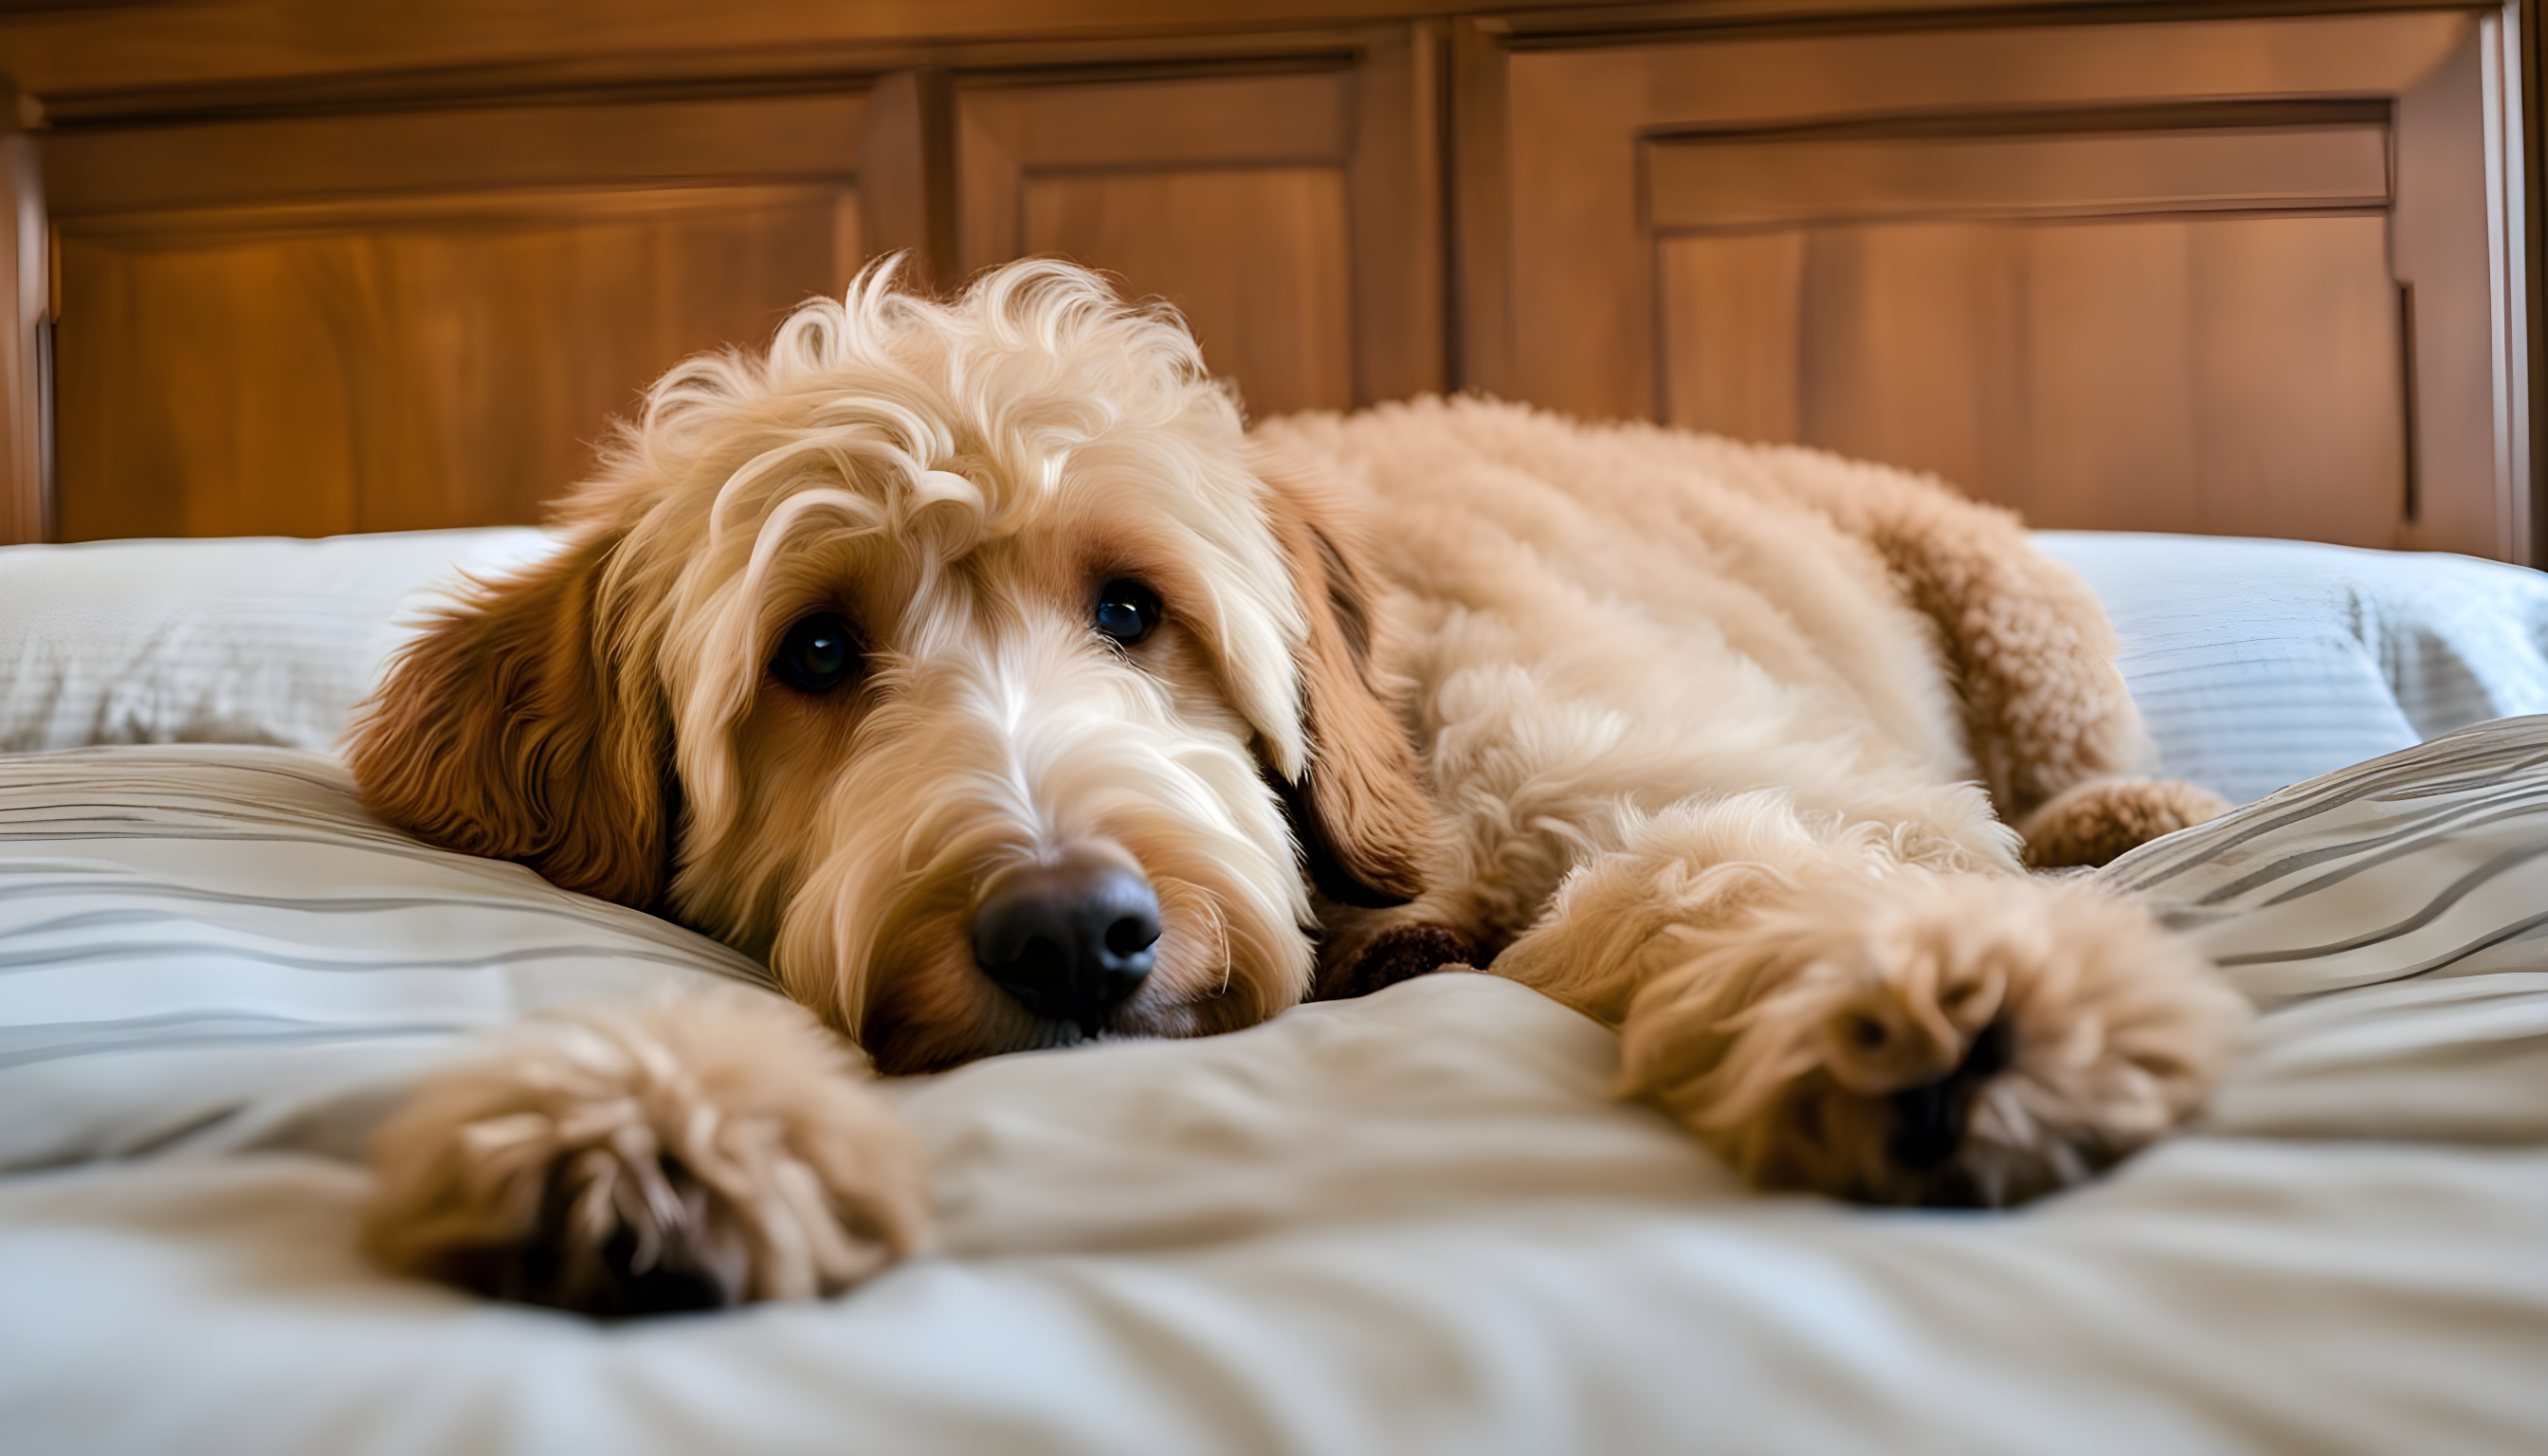 Bella the Labradoodle sprawled across a queen-sized bed.